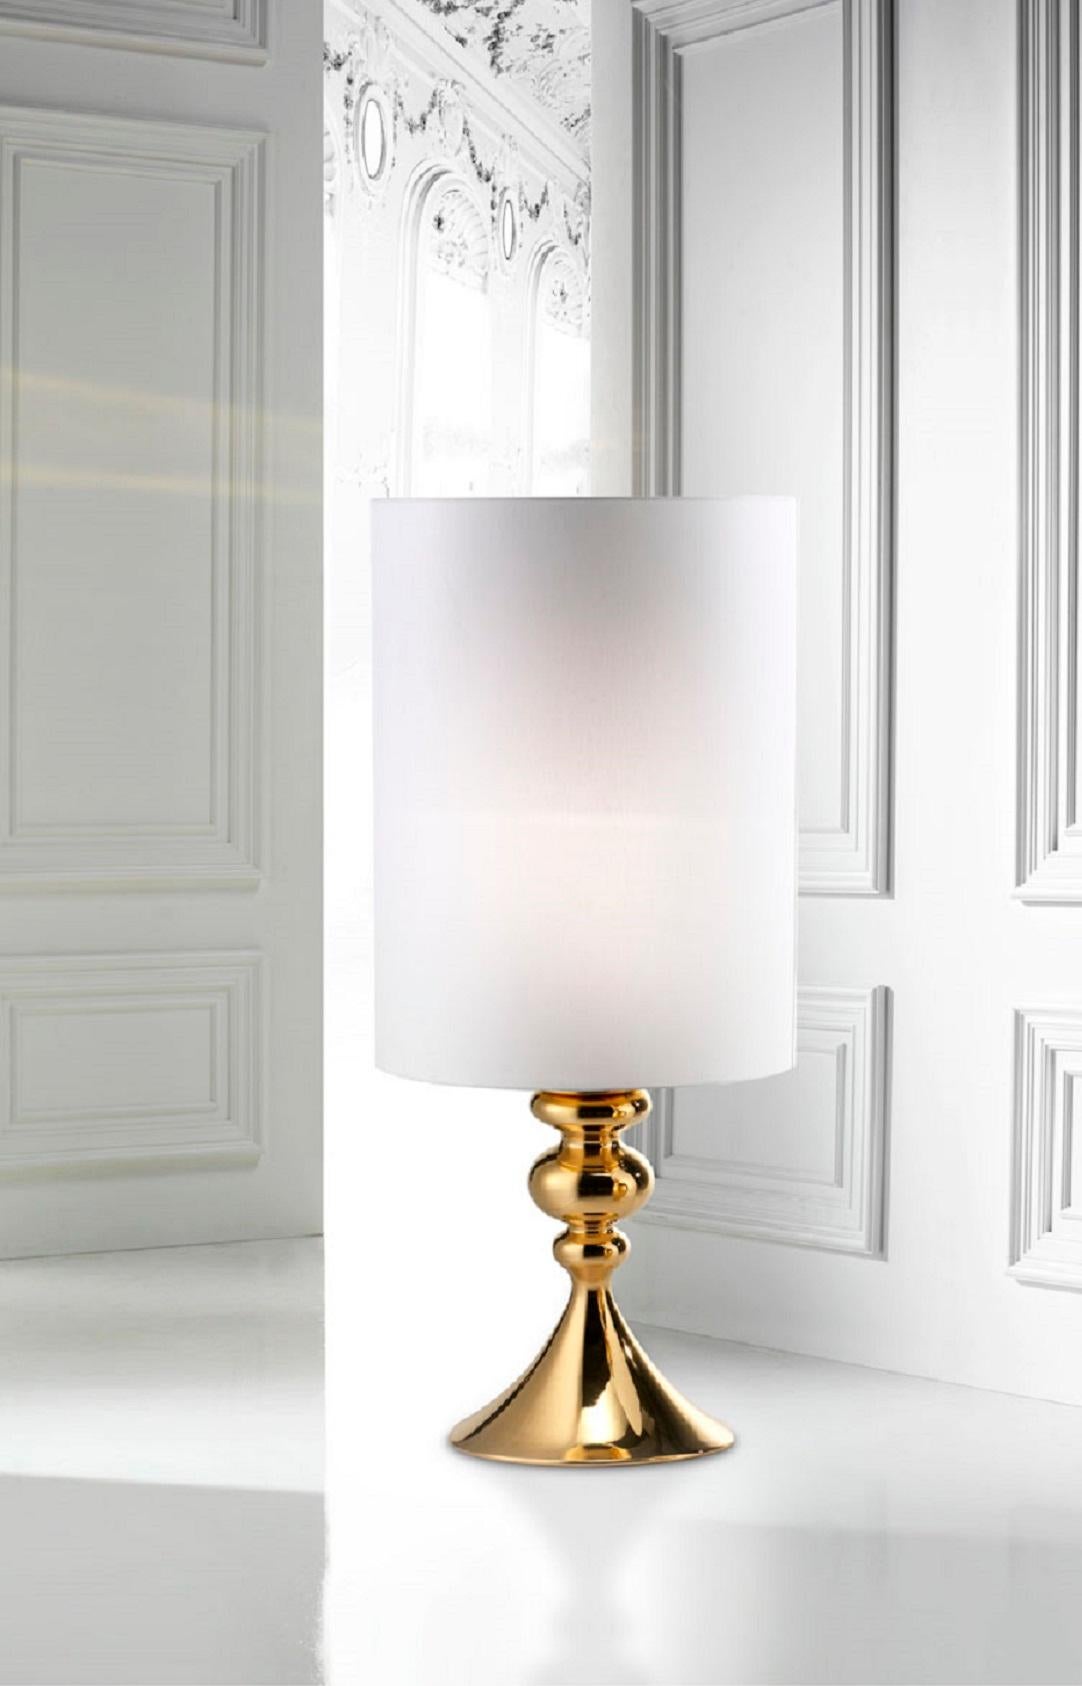 Ceramic table lamp handcrafted in 24-karat gold with cotton lampshade
KAY, code LK145, measures: Height 110.0 cm., diameter 45.0 cm.